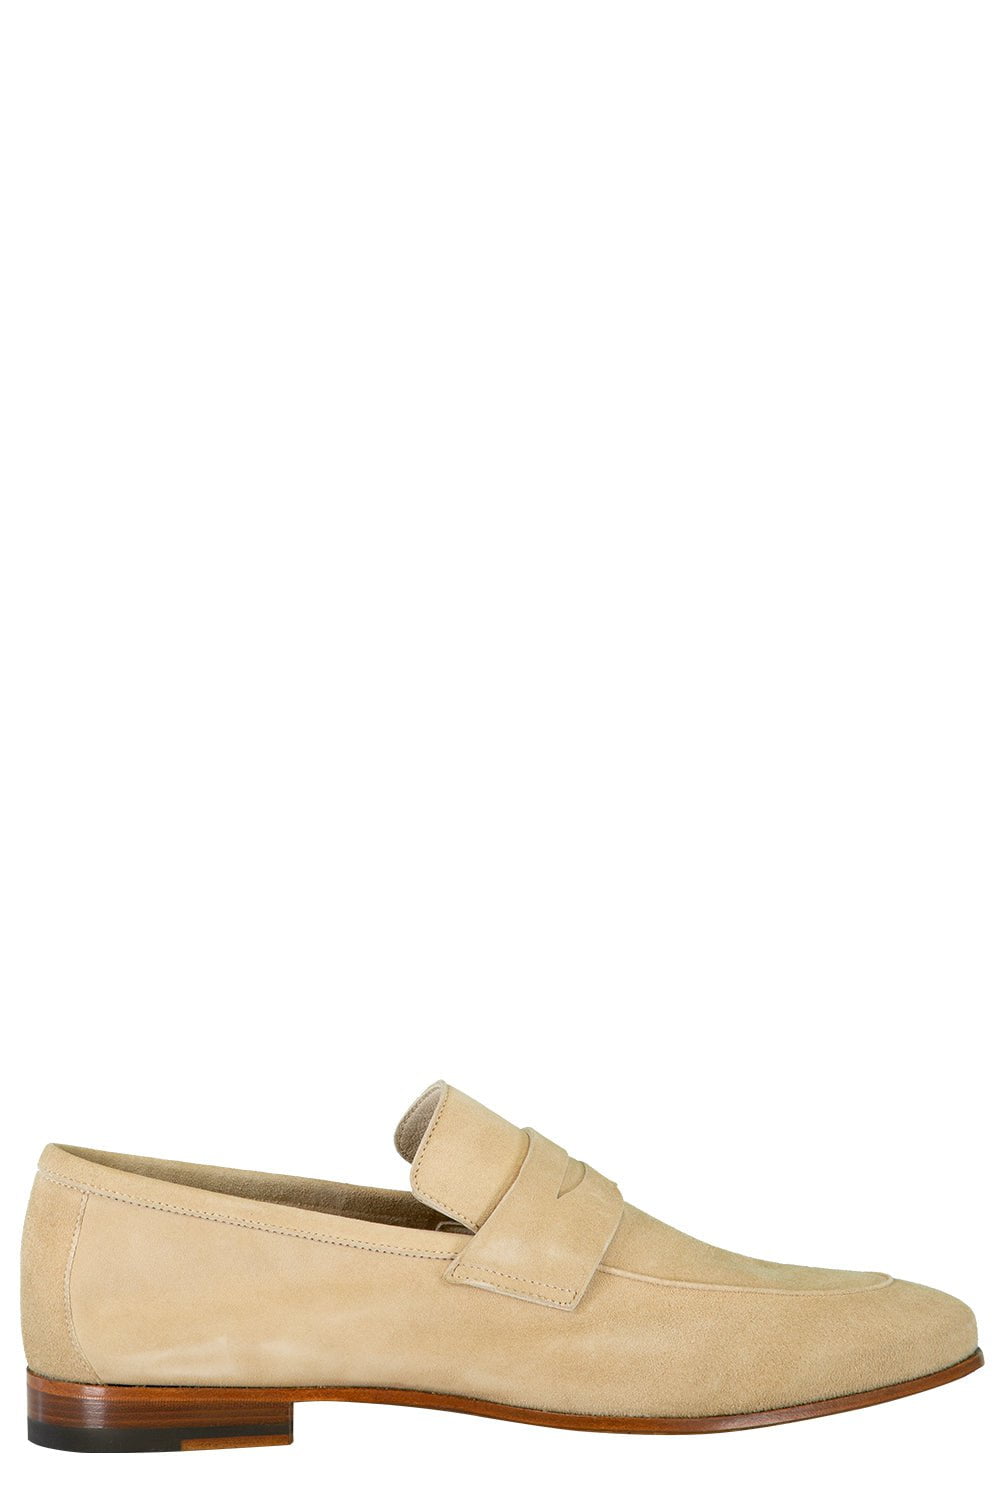 ELEVENTY-Suede Loafers - Sabbia-